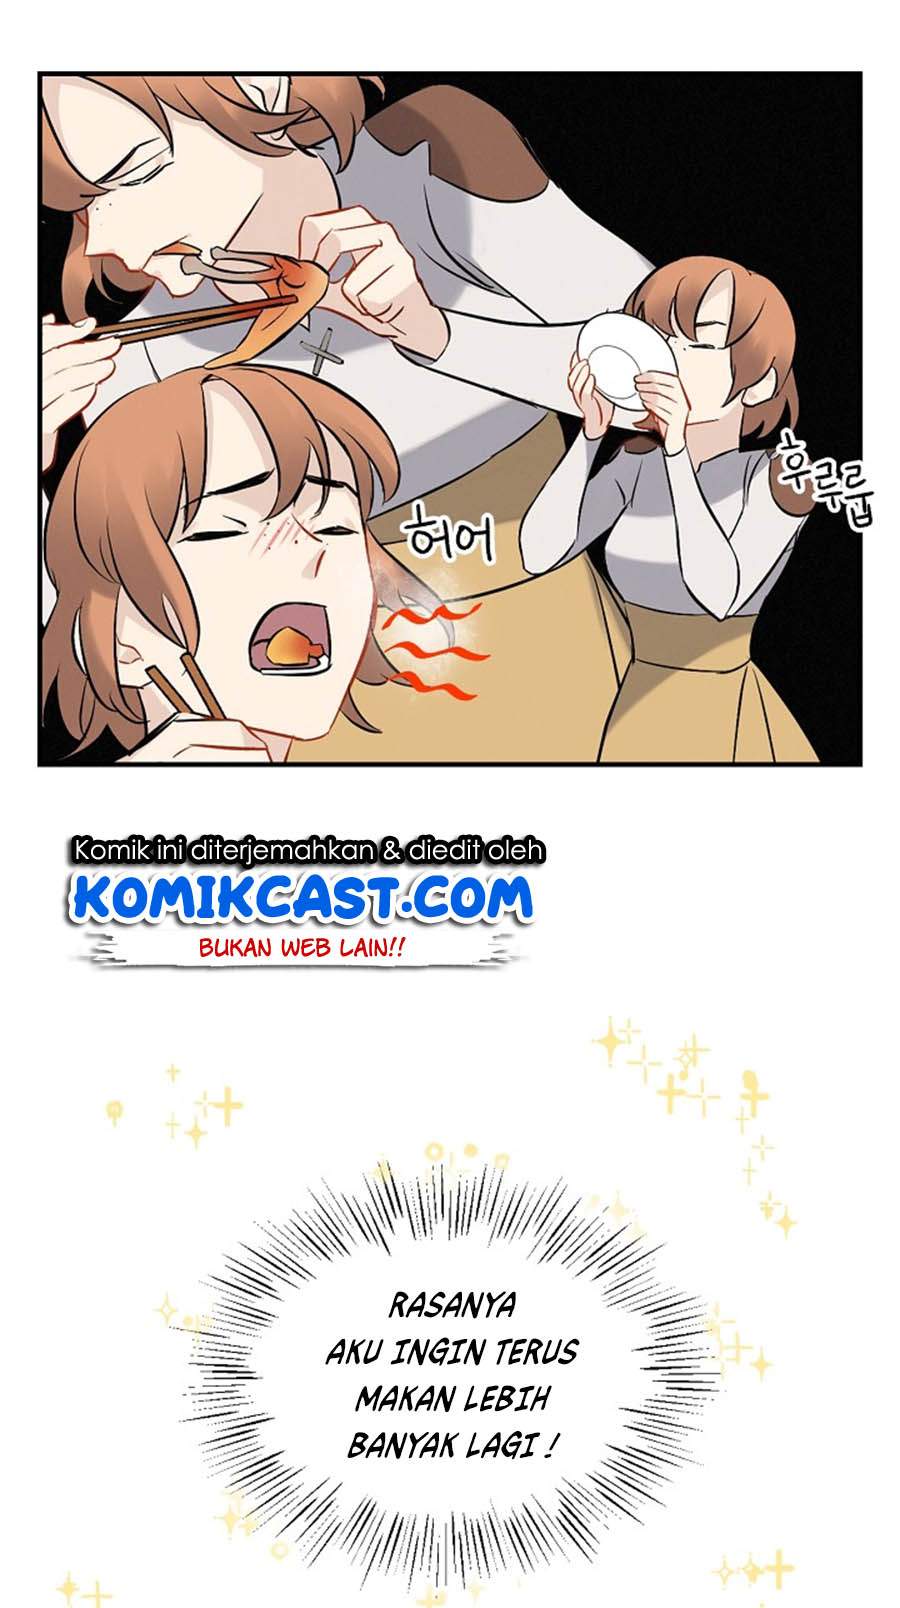 Leveling Up, By Only Eating! (Gourmet Gaming) Chapter 12 - 471